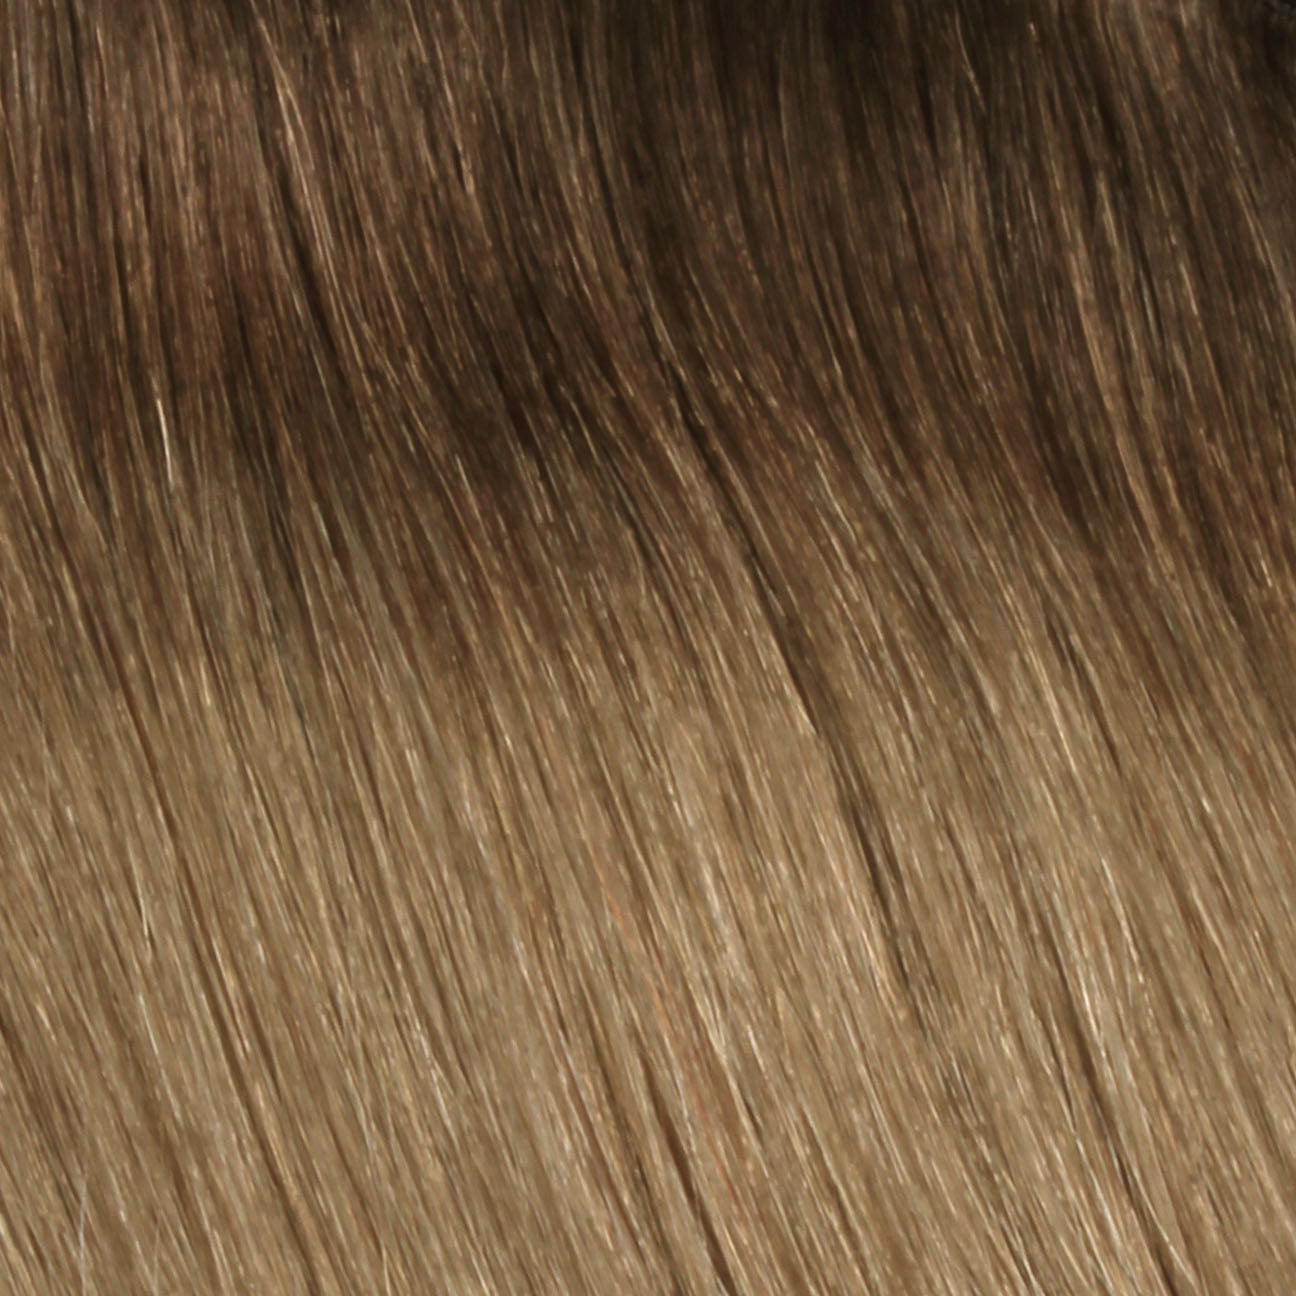 Nano Bonds 18 Inches - SWAY Hair Extensions Rooted-Champagne-Chestnut-R5-8-22 Ultra-fine, invisible bonds for a flawless, natural look. 100% Remy Human hair, lightweight and versatile. Reusable and perfect for individual or salon use.